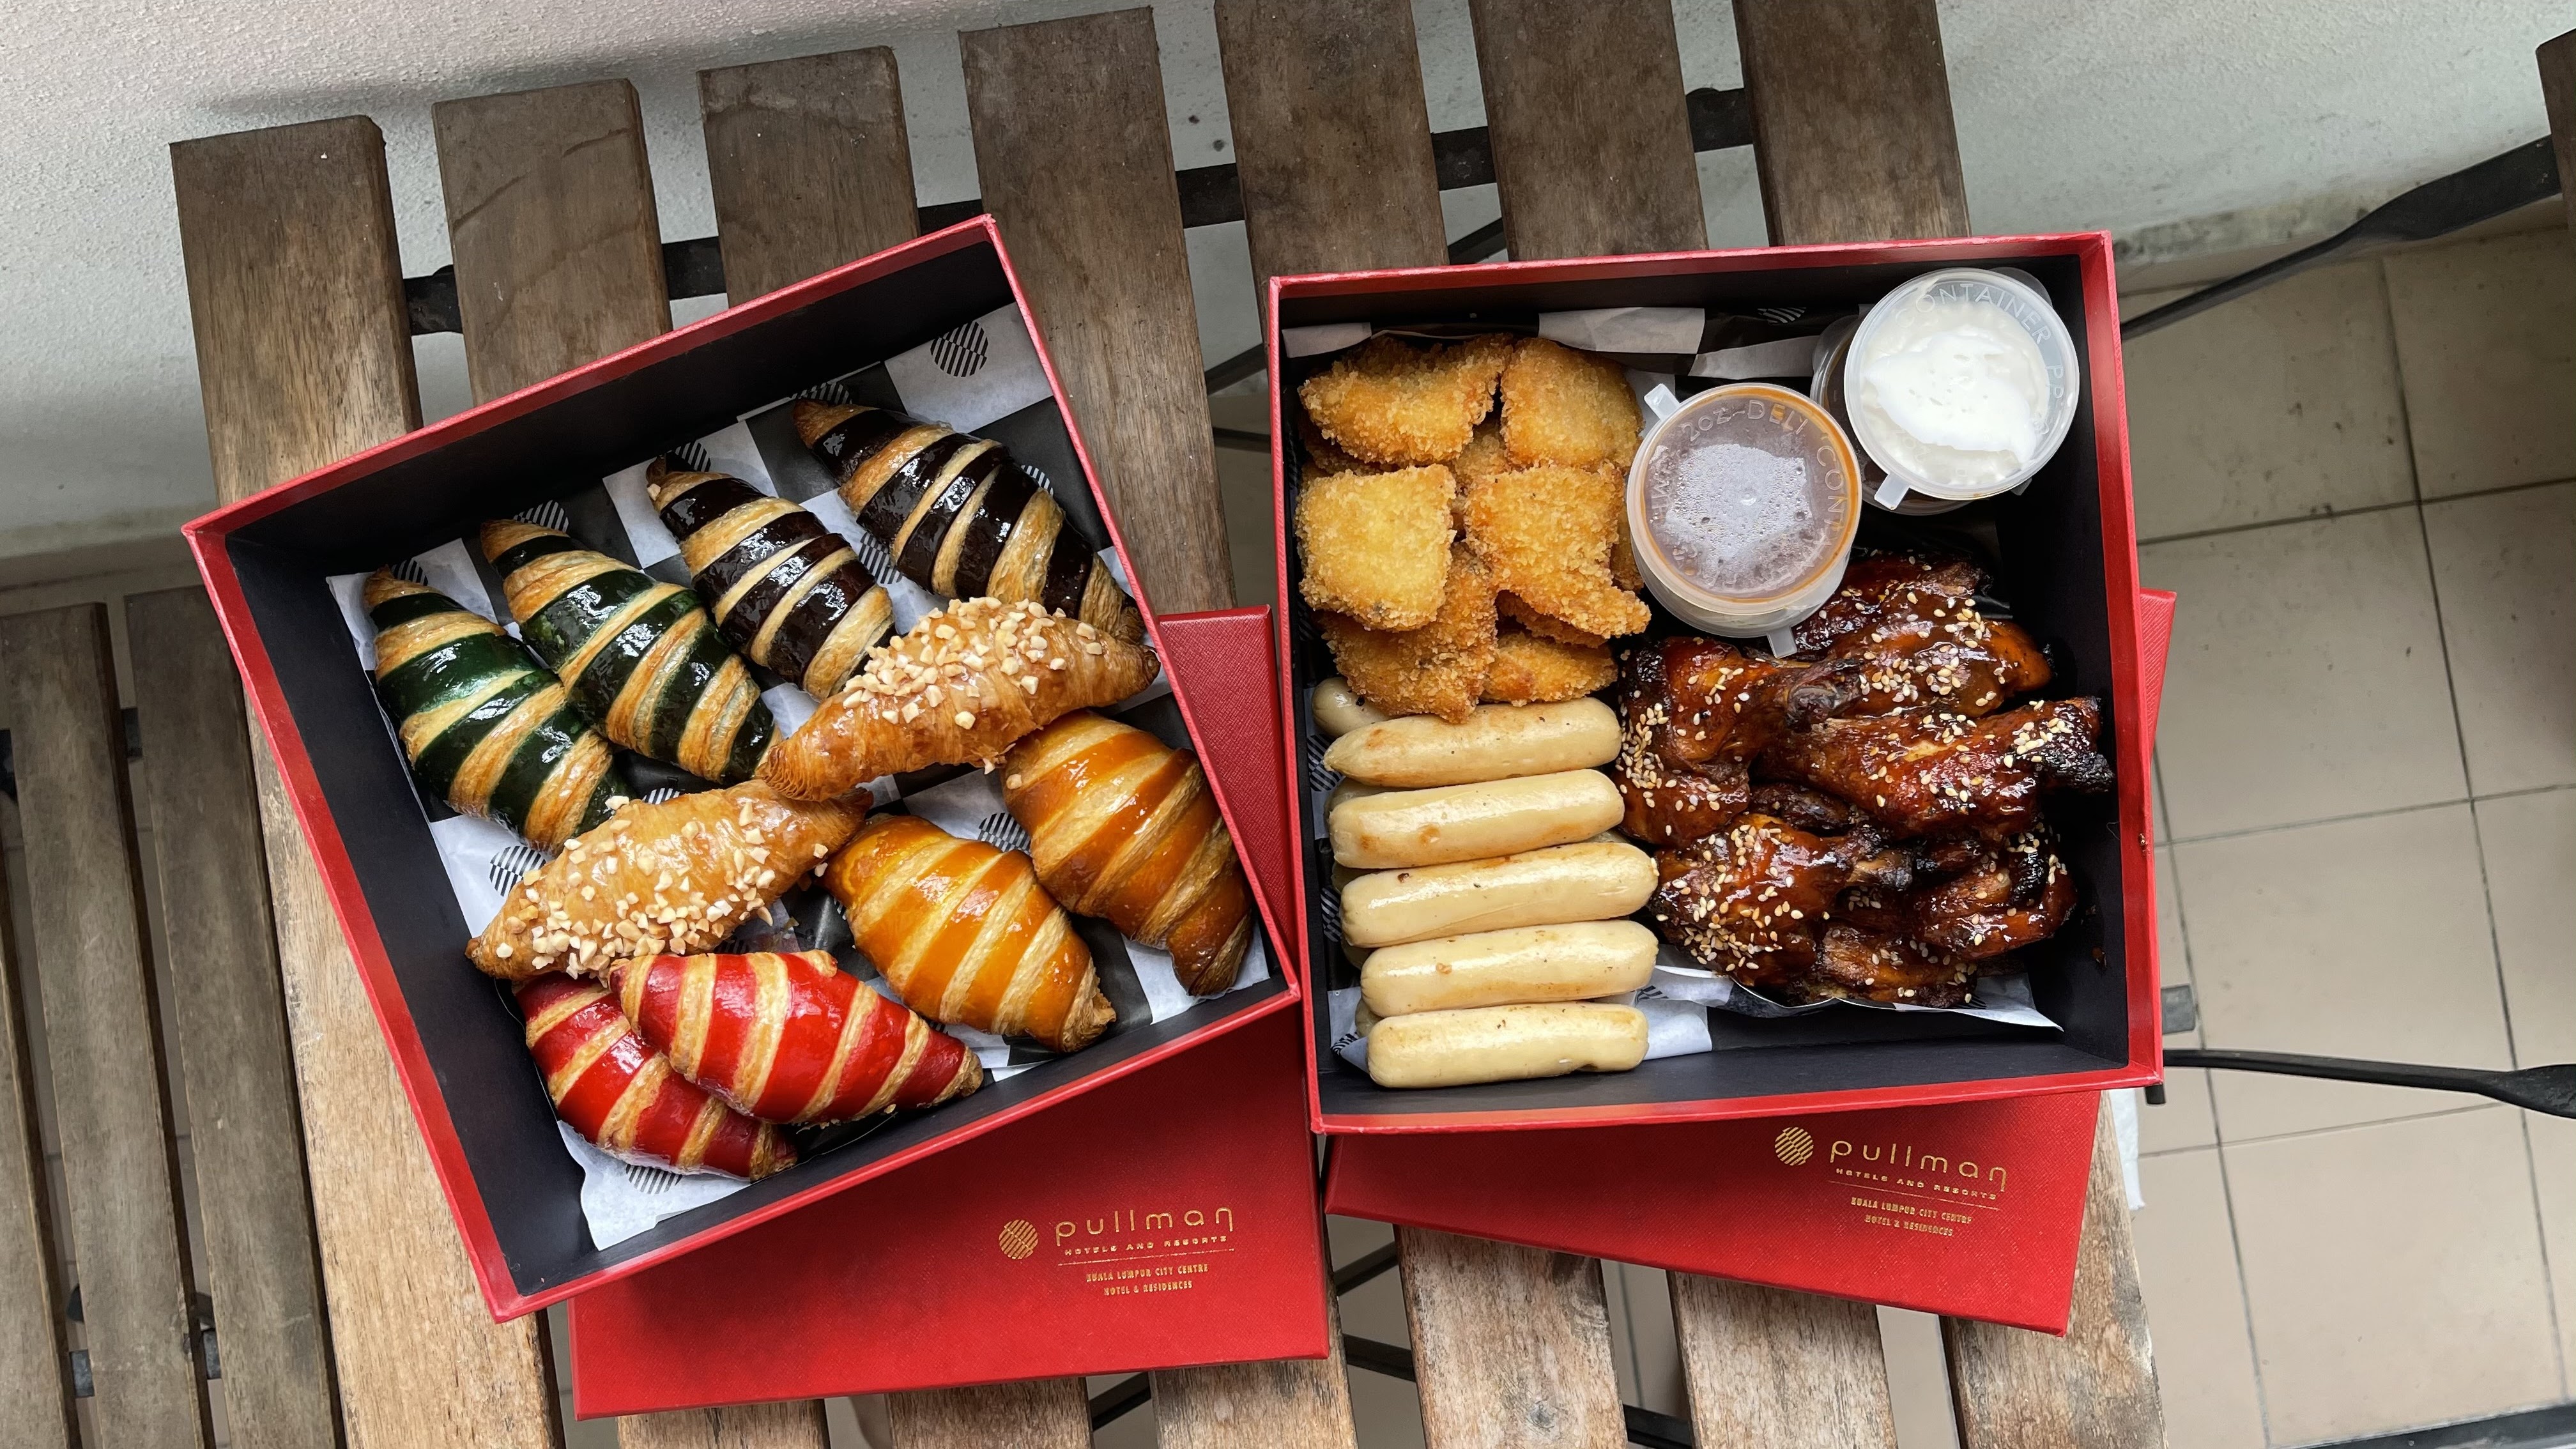 PARTY FOOD DELIVERY BY PULLMAN KUALA LUMPUR CITY CENTRE HOTEL & RESIDENCES (PULLMAN KLCC)